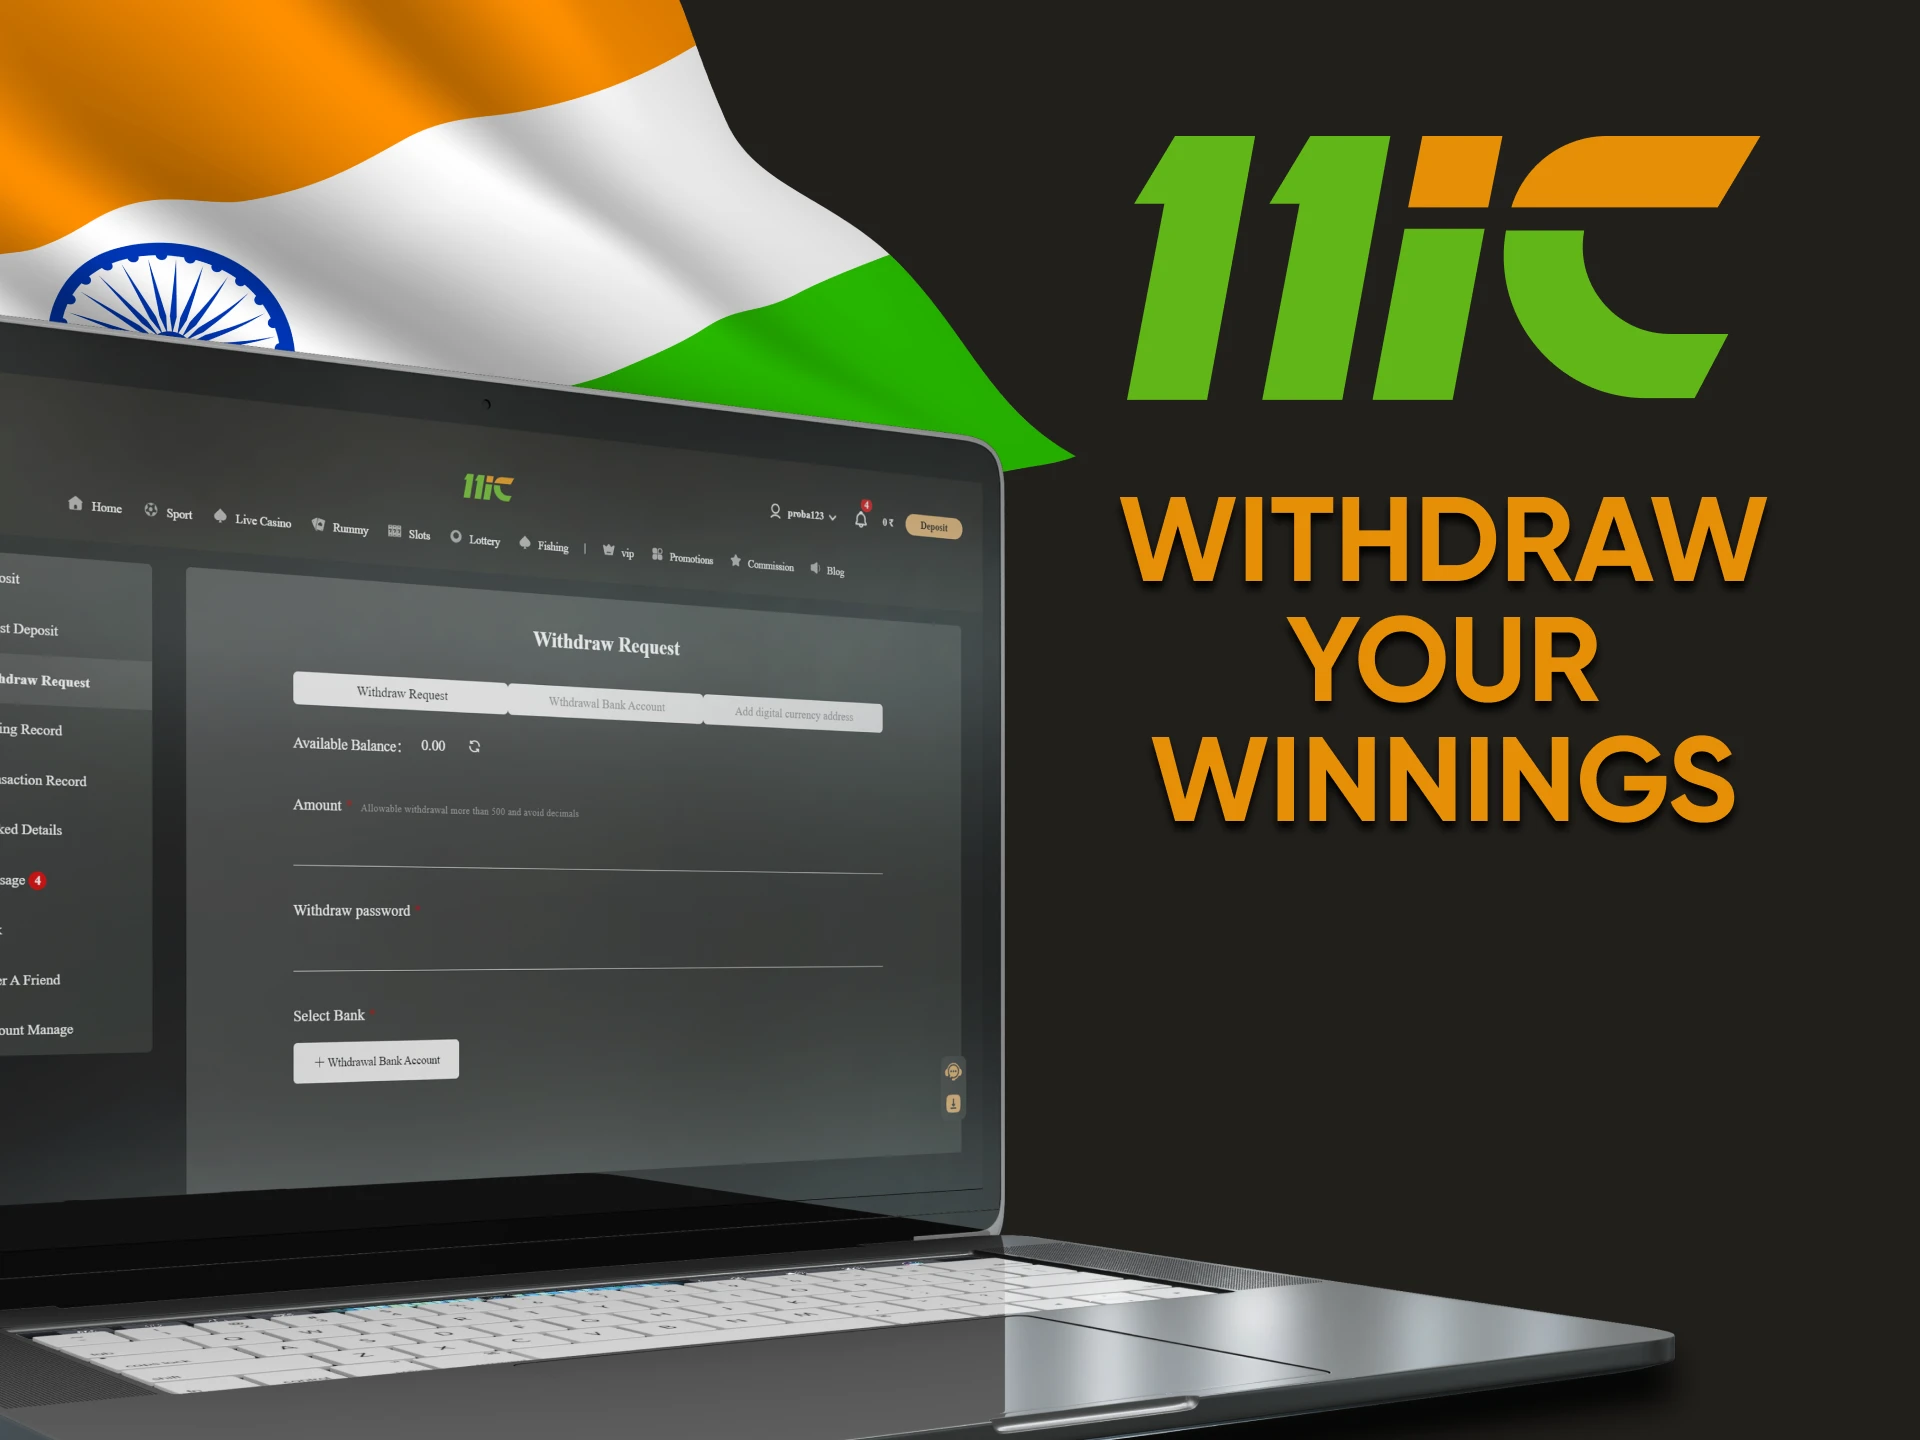 After winning the bet, you can withdraw funds from 11ic.